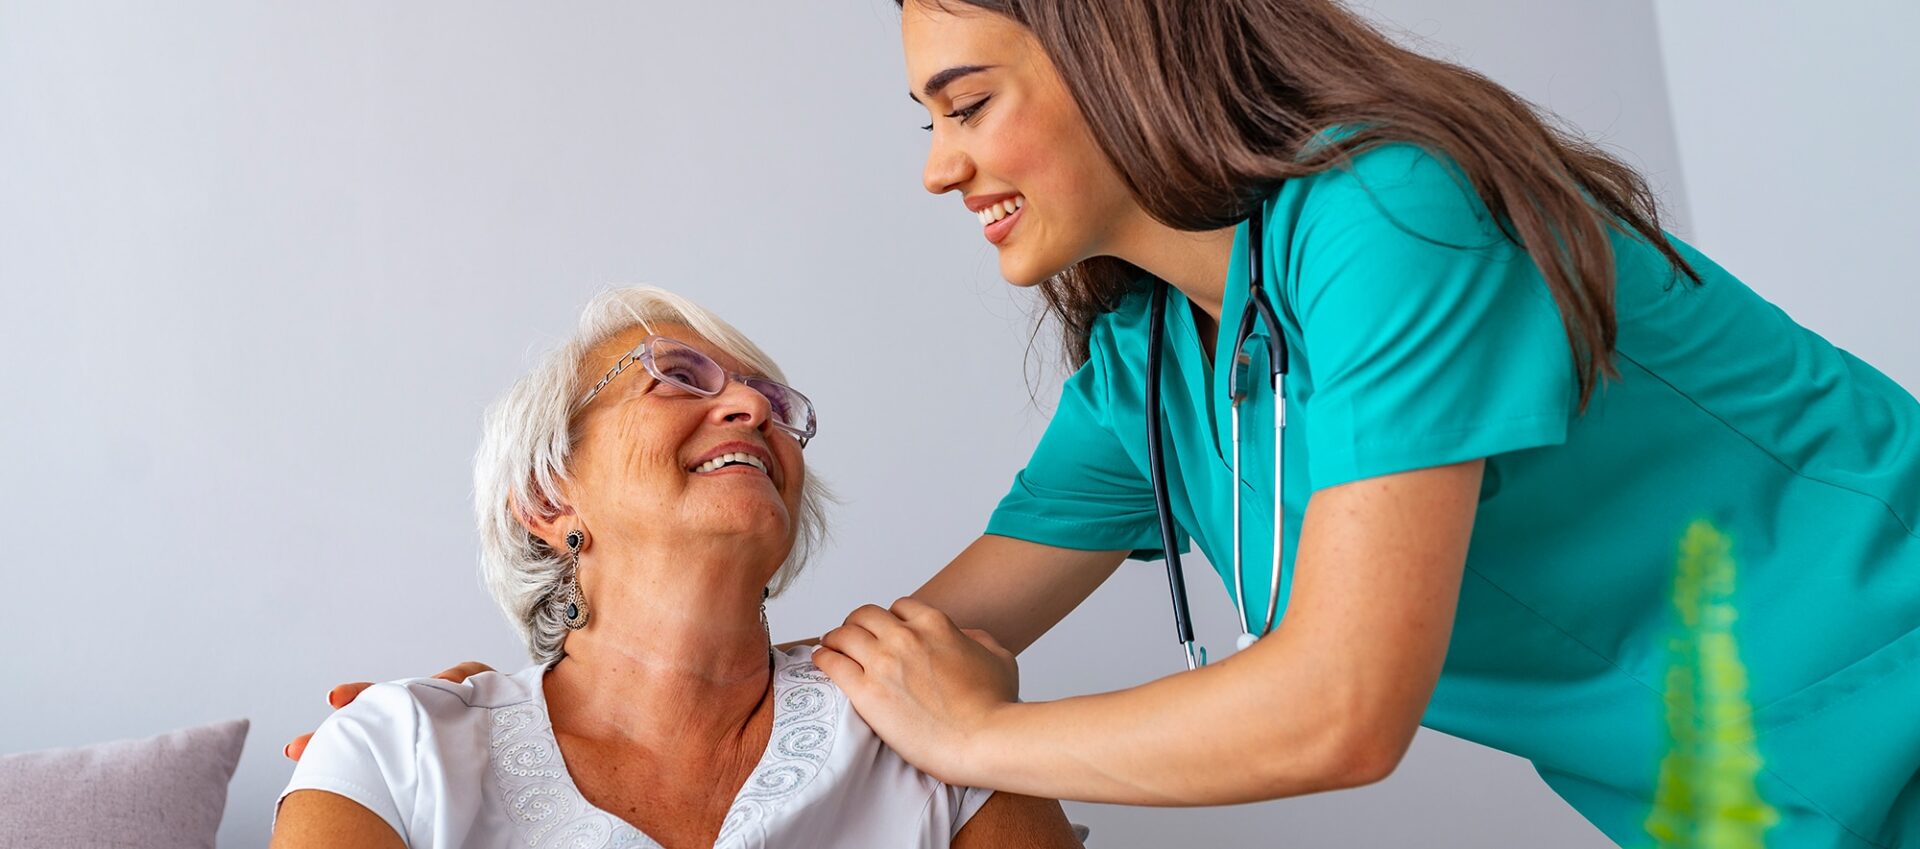 Smiling elderly female patient looking up at smiling female doctor